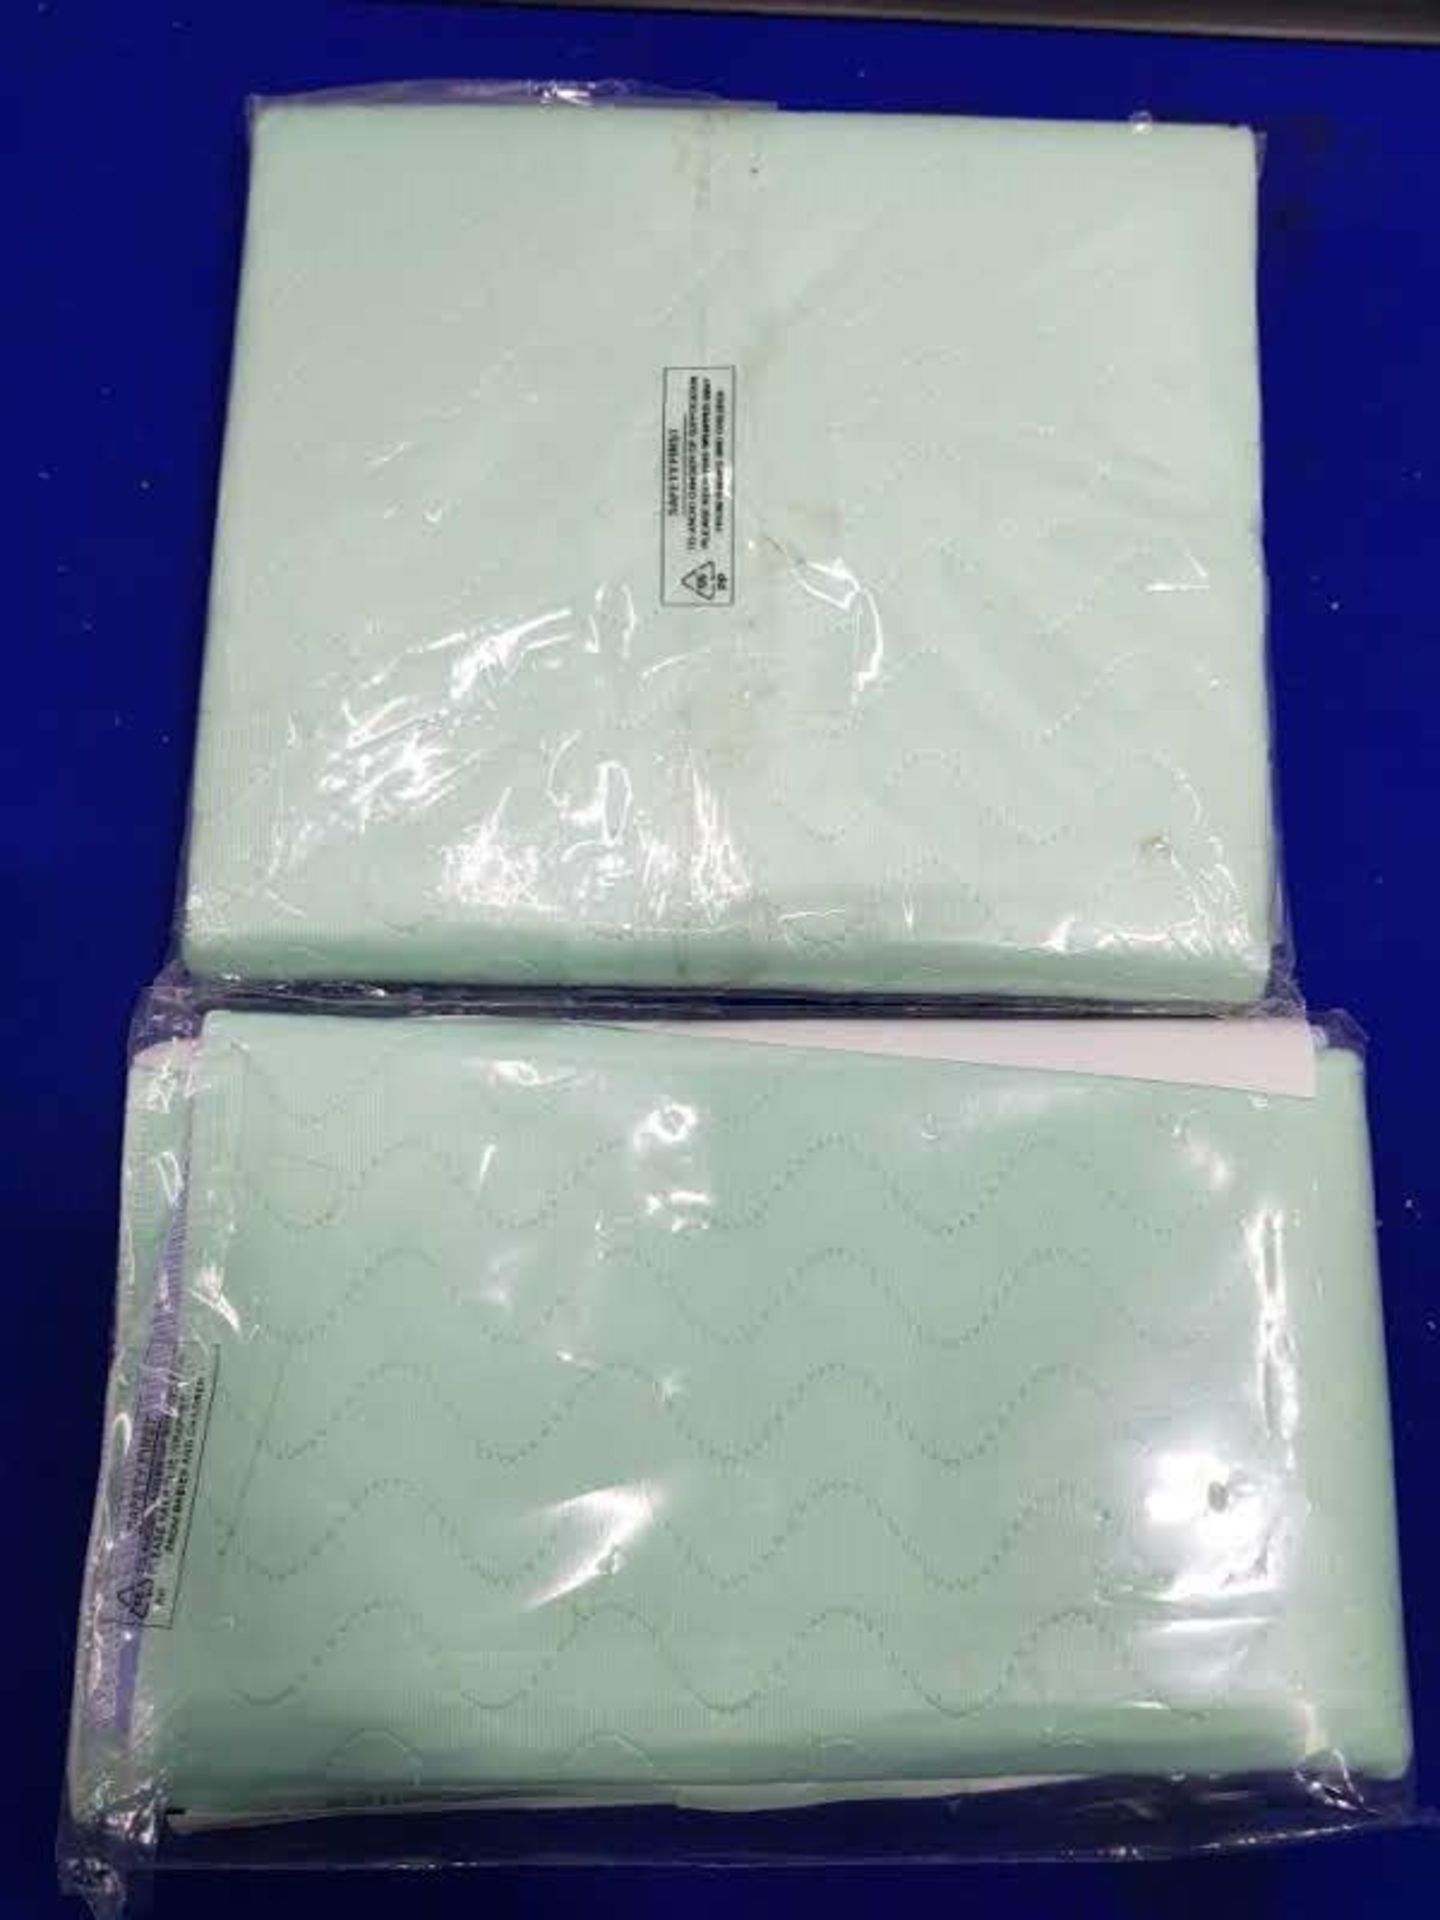 2x Mixed Sizes Comfort Nights Waterproof Bed Mats - Image 2 of 2